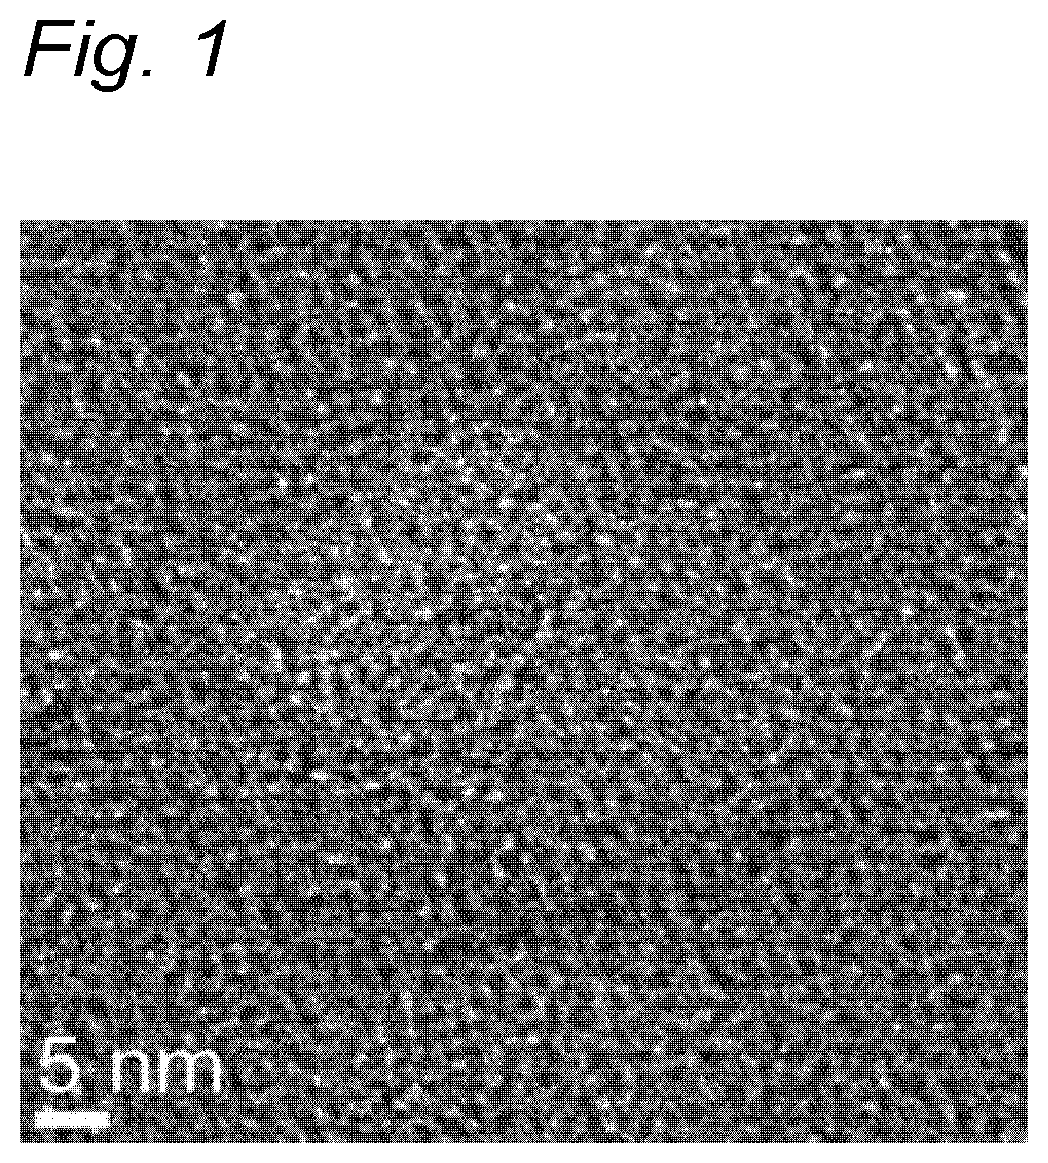 Carbonaceous material for negative electrode active material for non-aqueous electrolyte secondary batteries, non-aqueous electrolyte secondary battery negative electrode, non-aqueous electrolyte secondary battery, and production method of carbonaceous material